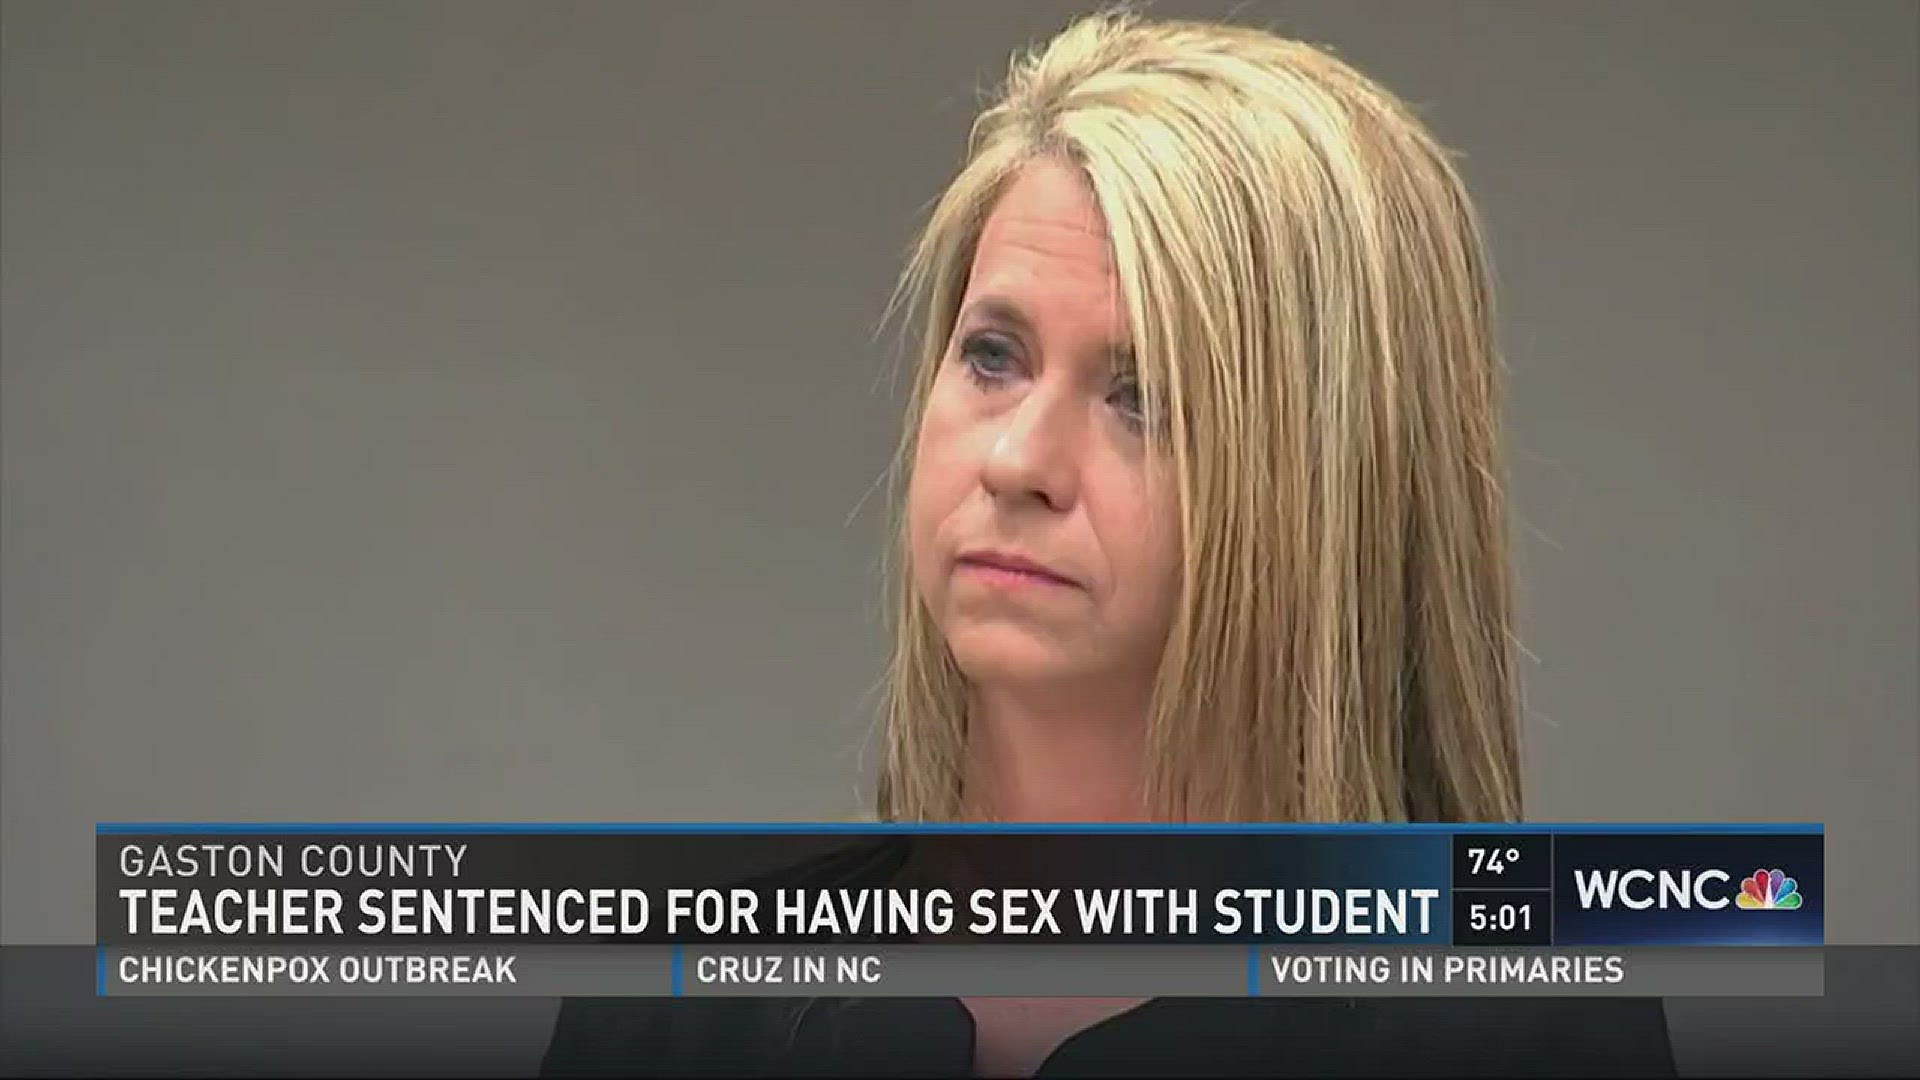 Teacher who slept with student gets no jail time | wcnc.com